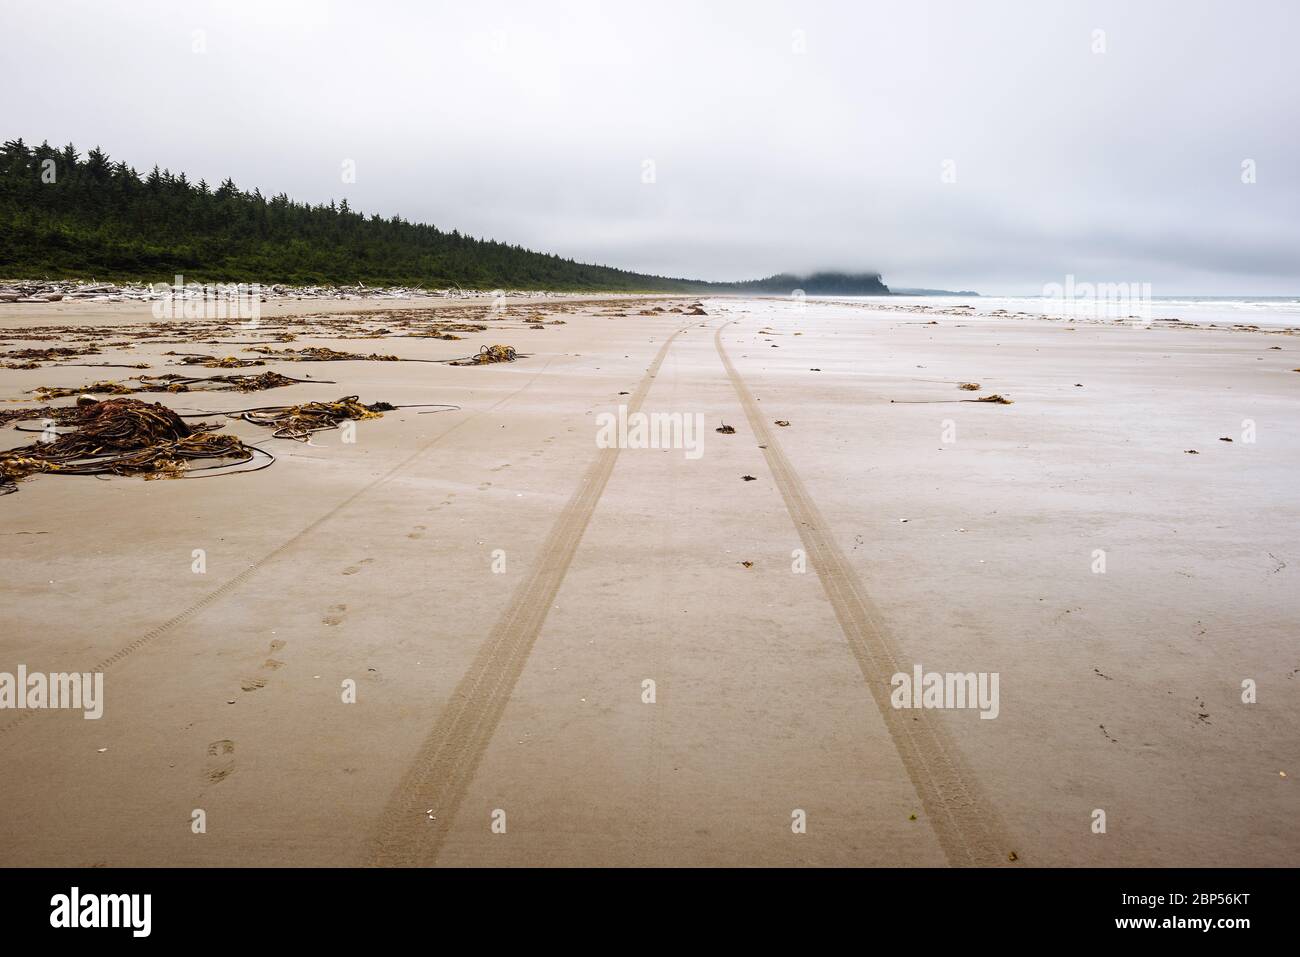 Footprints and tire tracks in the sand in Naikoon Provincial Park, Haida Gwaii, British Columbia Stock Photo